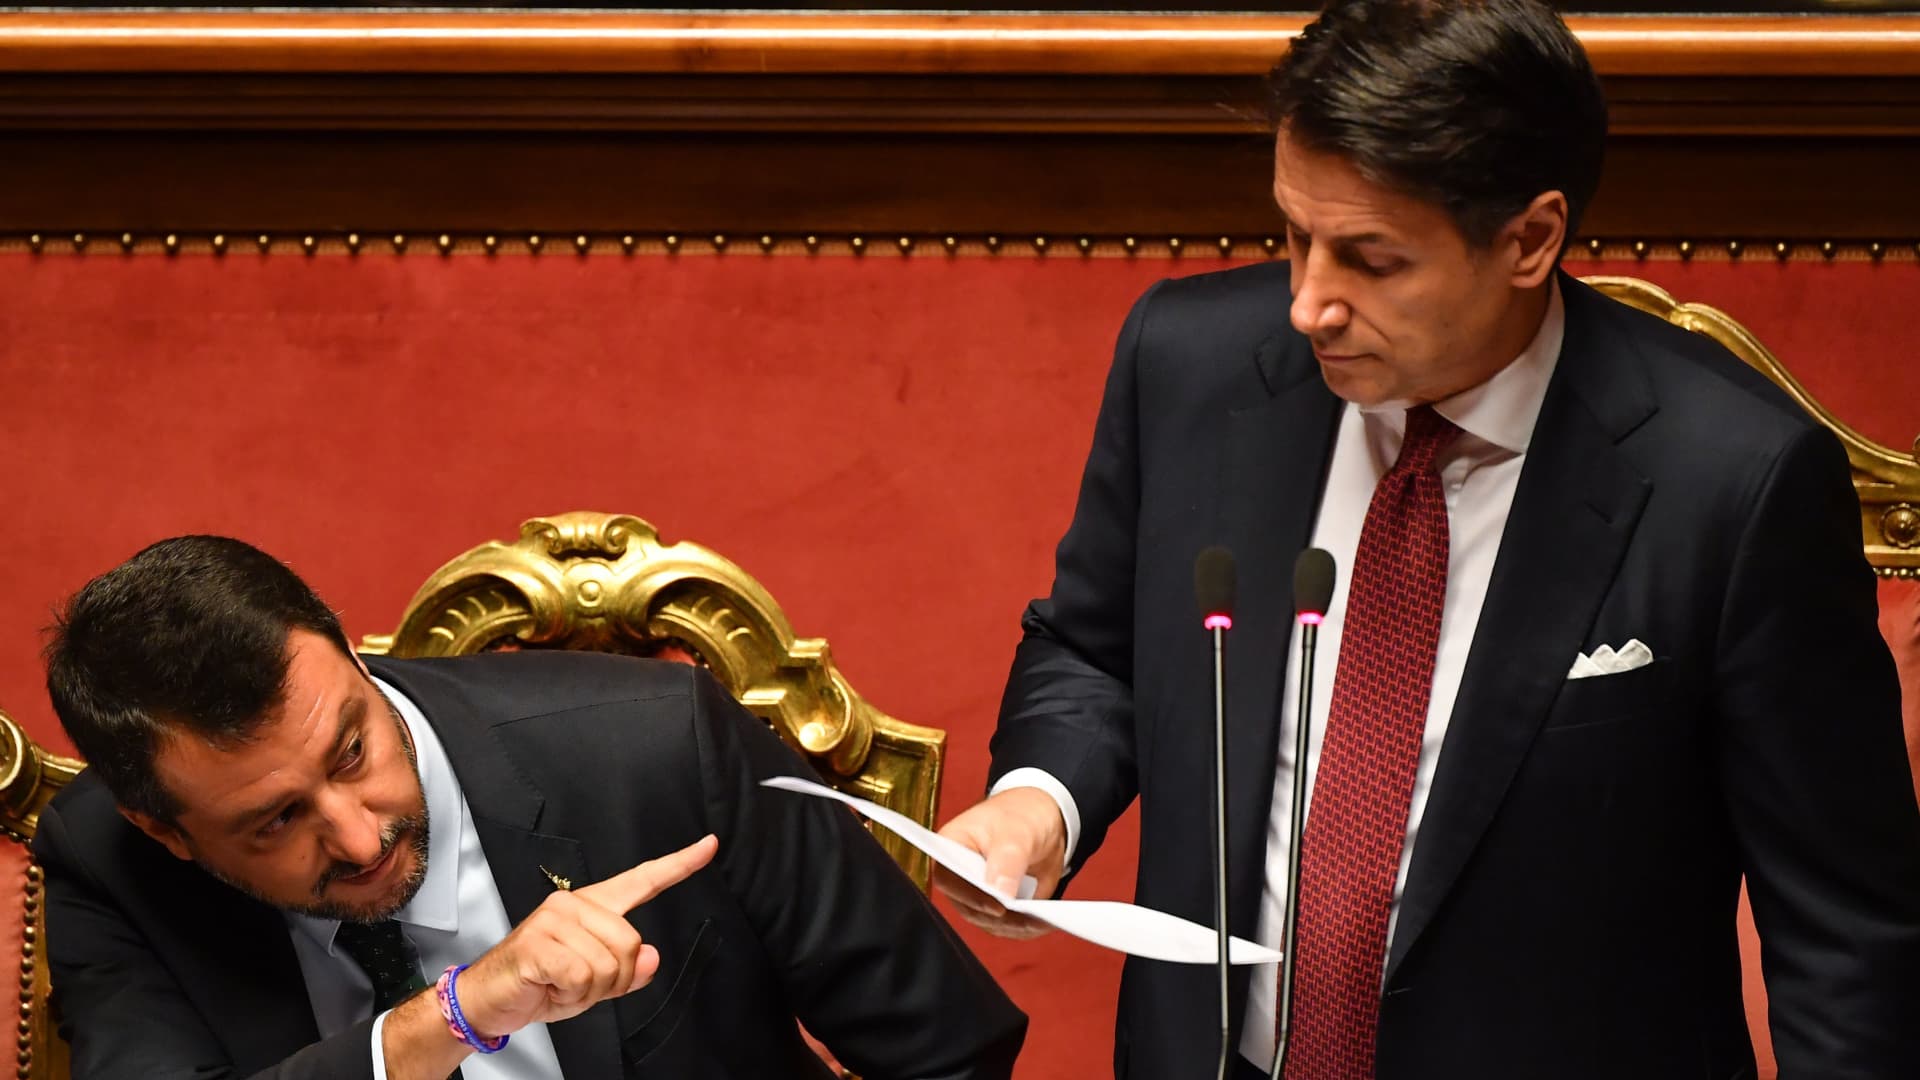 Italian Prime Minister Giuseppe Conte (R), flanked by Deputy Prime Minister and Interior Minister Matteo Salvini (L), delivers a speech at the Italian Senate, in Rome, on August 20, 2019, as the country faces a political crisis.